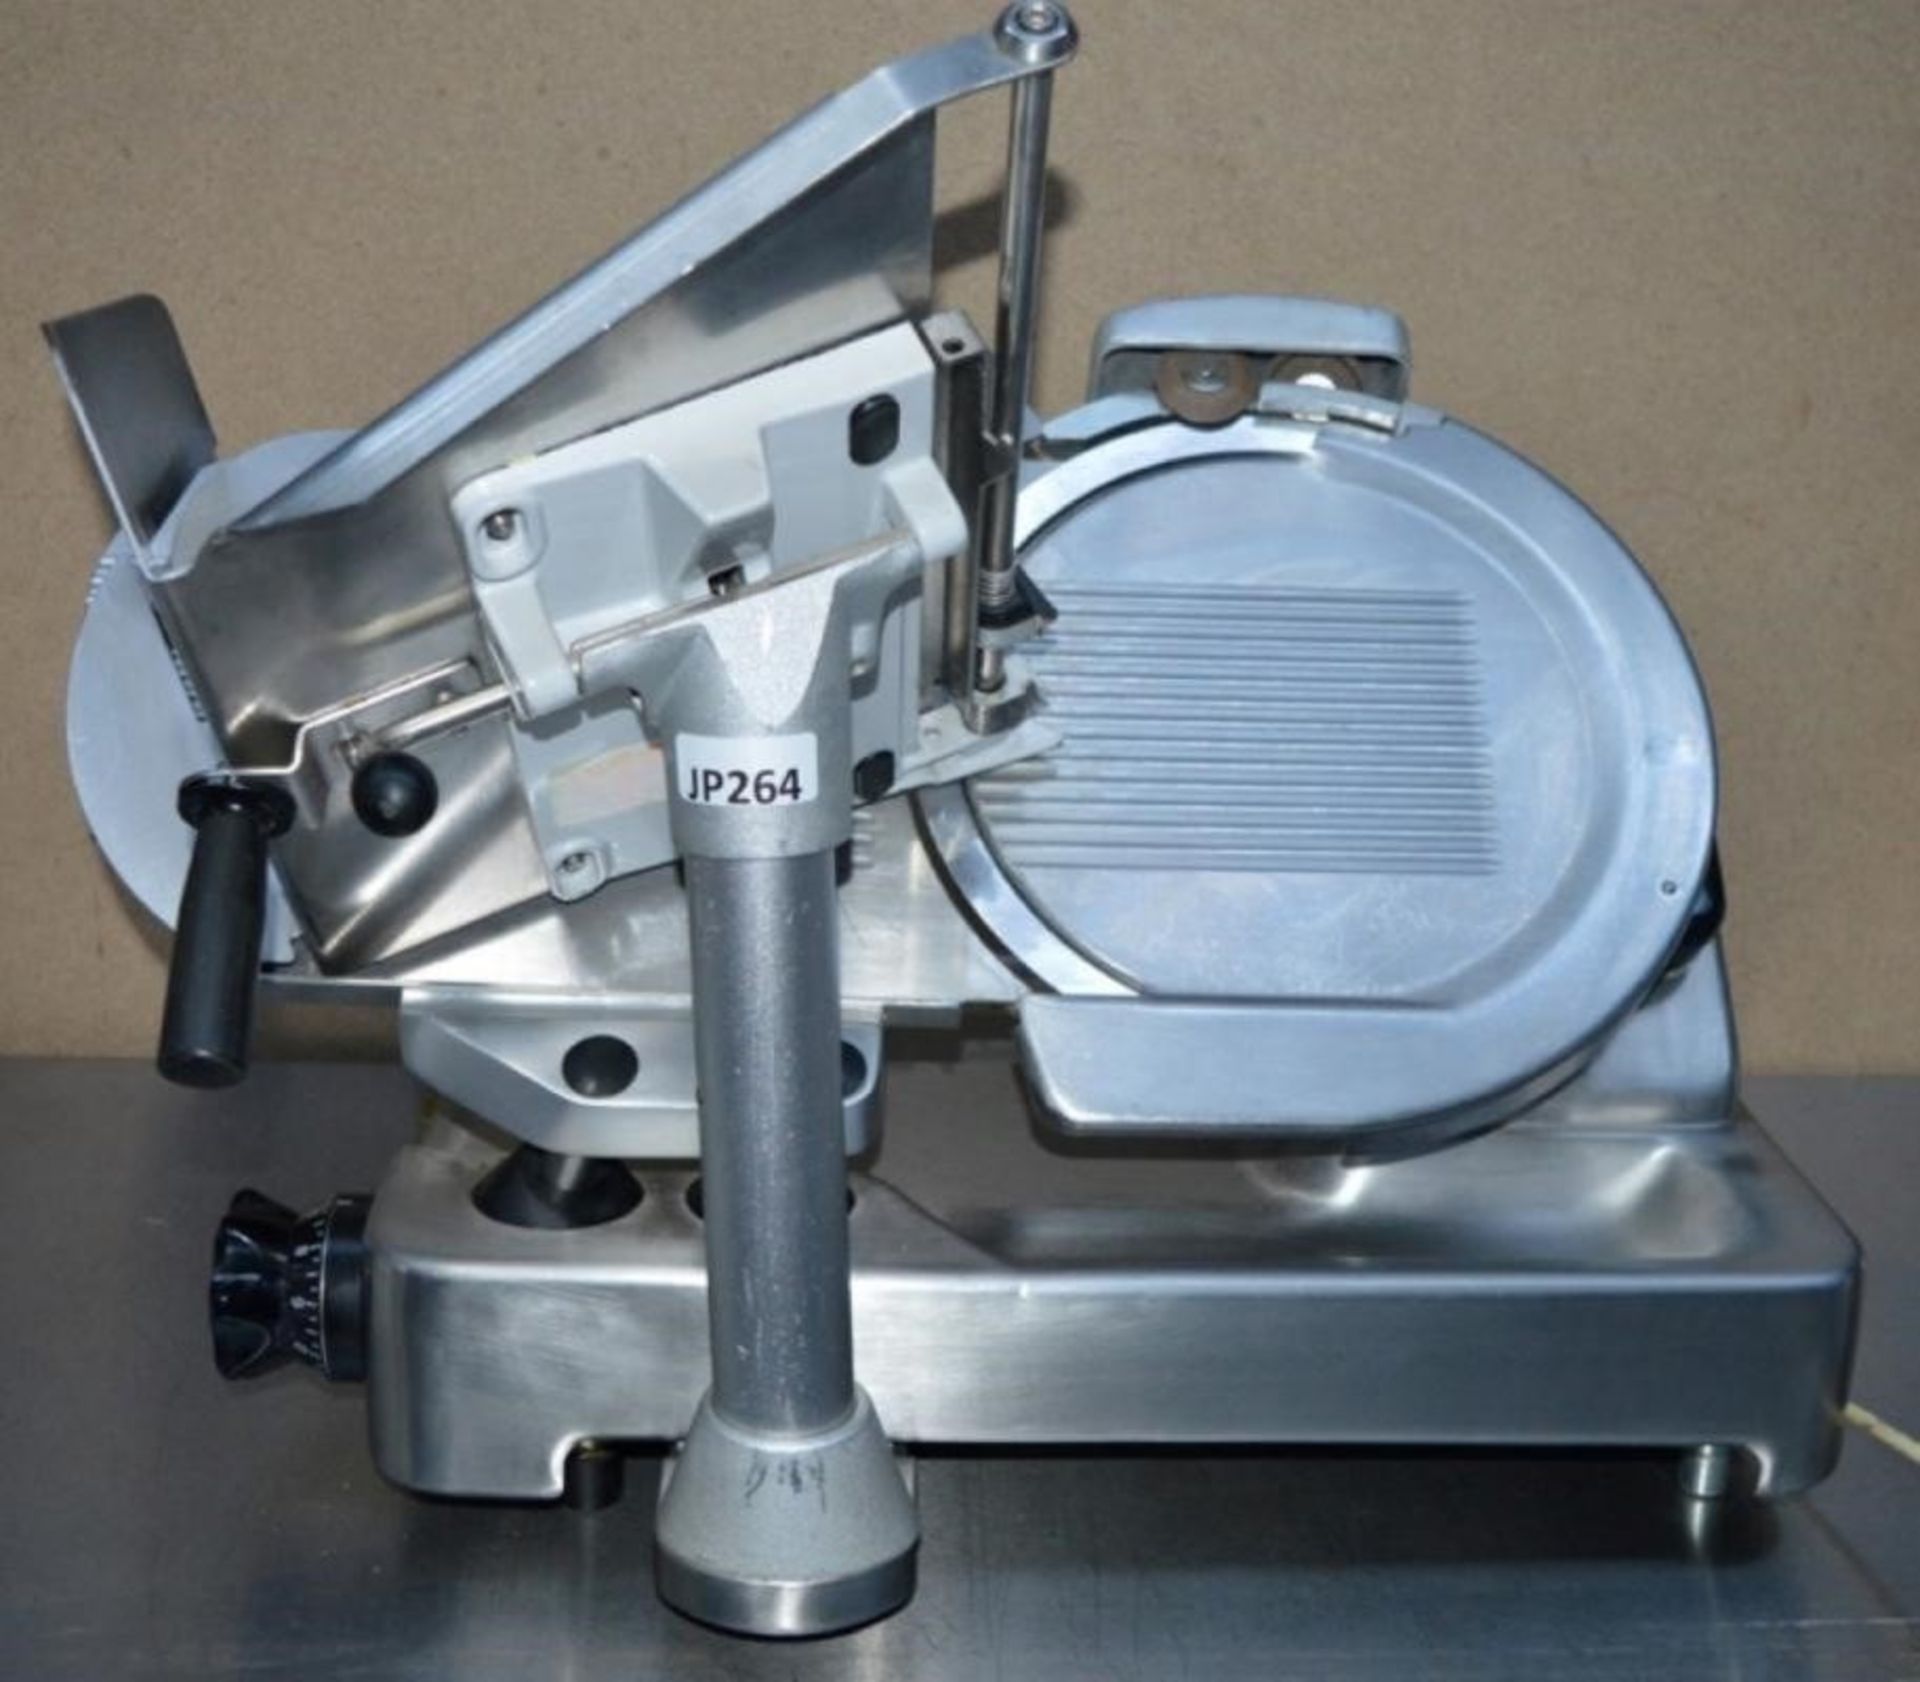 1 x Berkel 800S 12" Commercial Cooked Meat / Bacon Slicer - 220-240v - Dimensions H58 x W72 x D48 cm